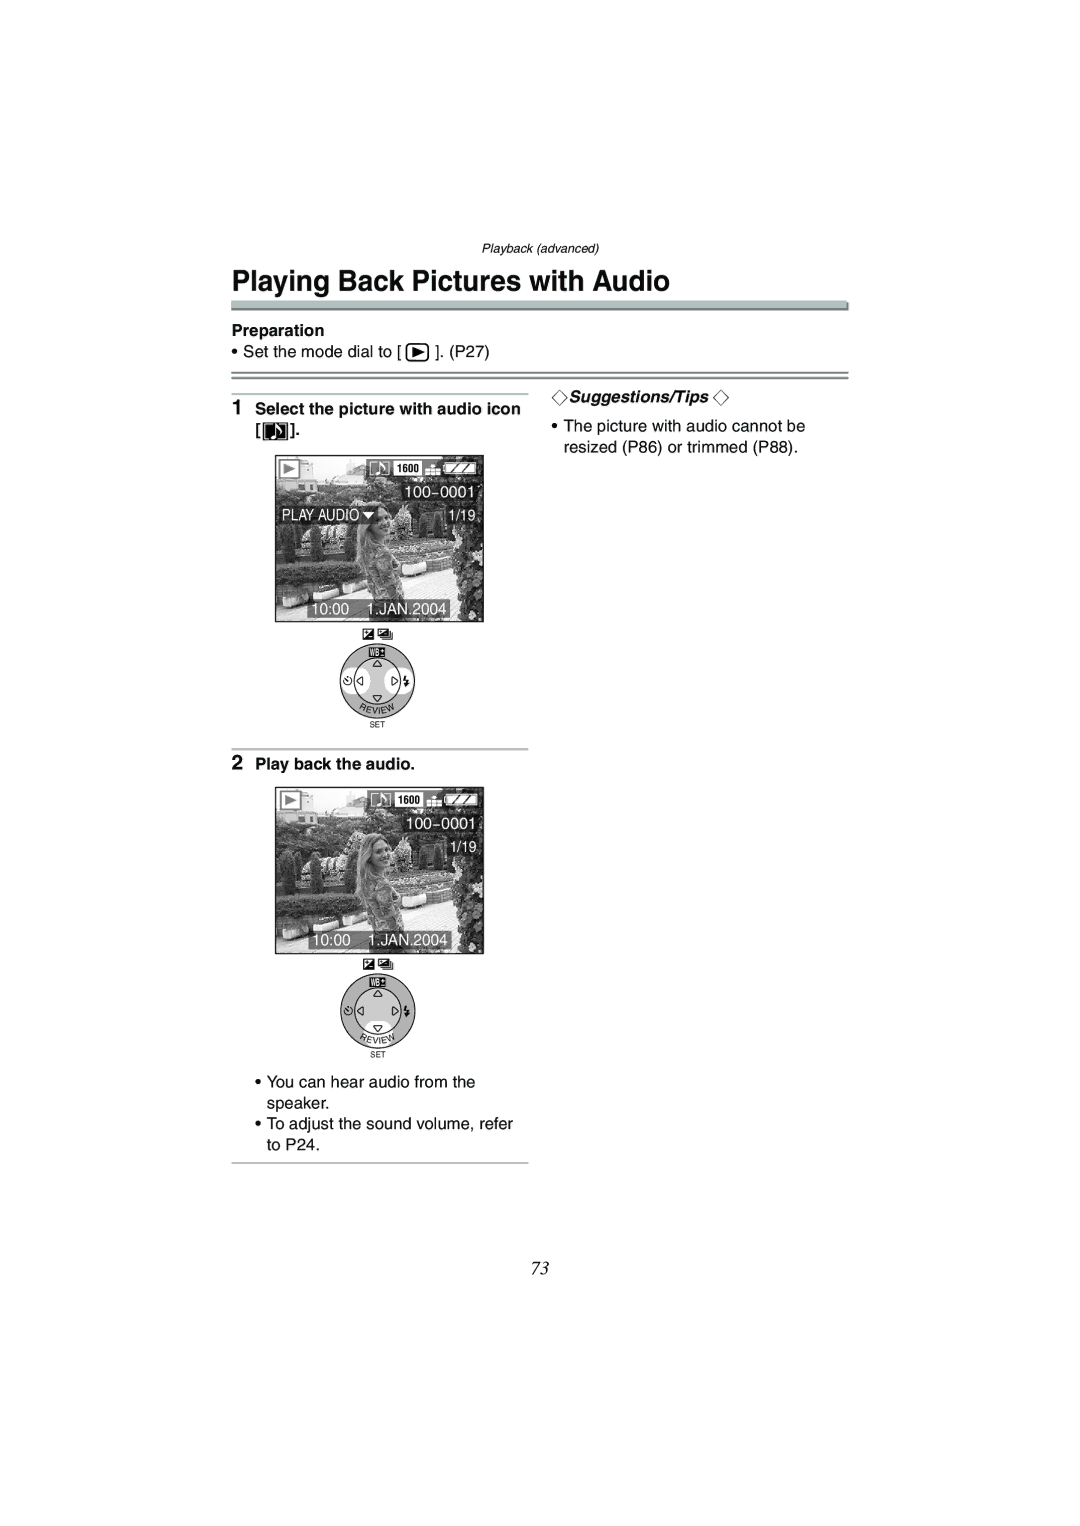 Panasonic DMC-FX1GN, DMC-FX5GN operating instructions Playing Back Pictures with Audio, Play back the audio 